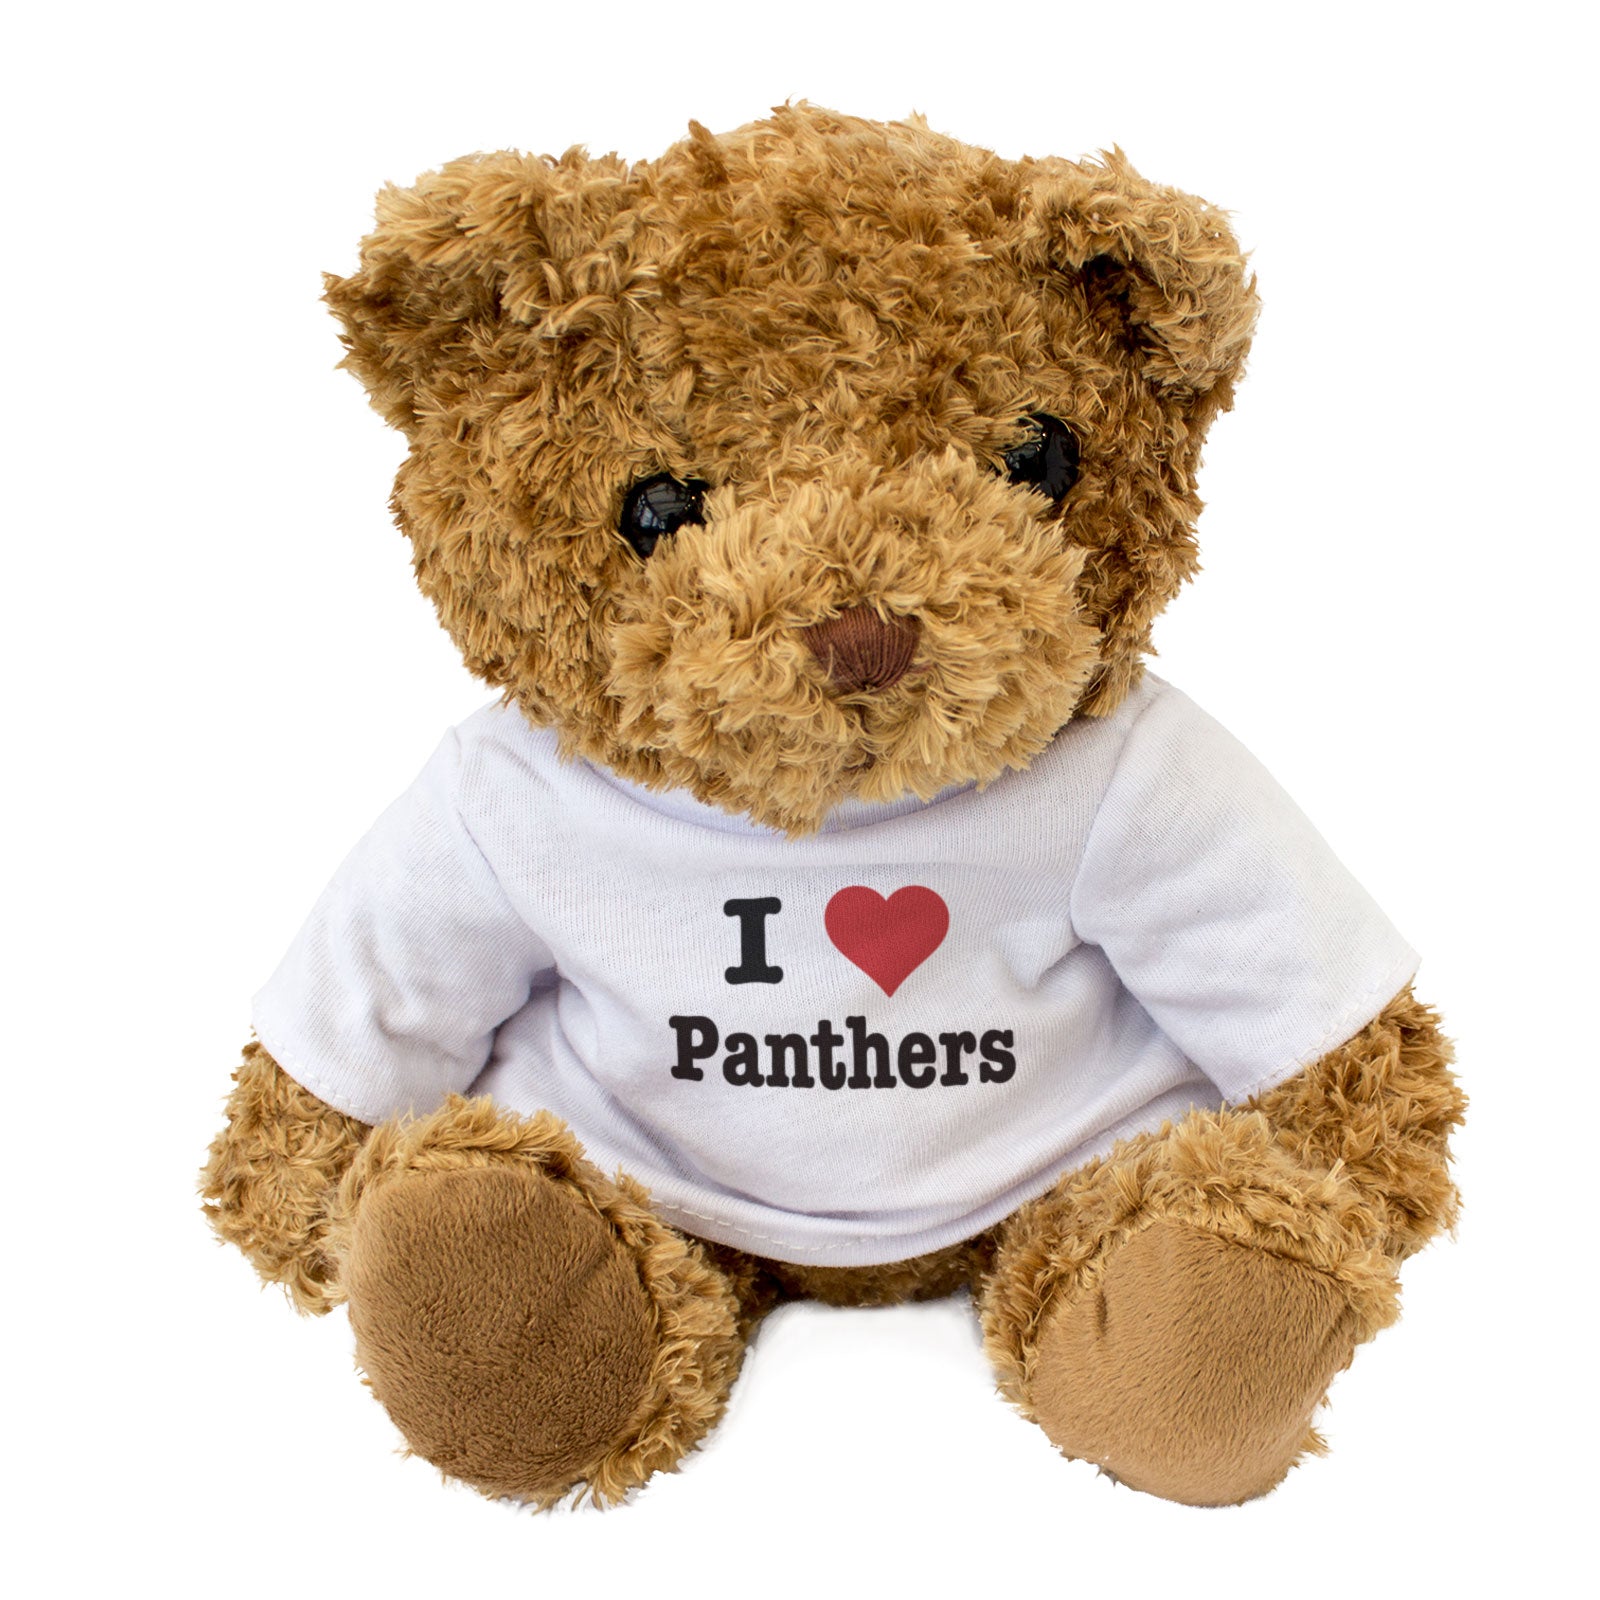 I Love Panthers - Teddy Bear